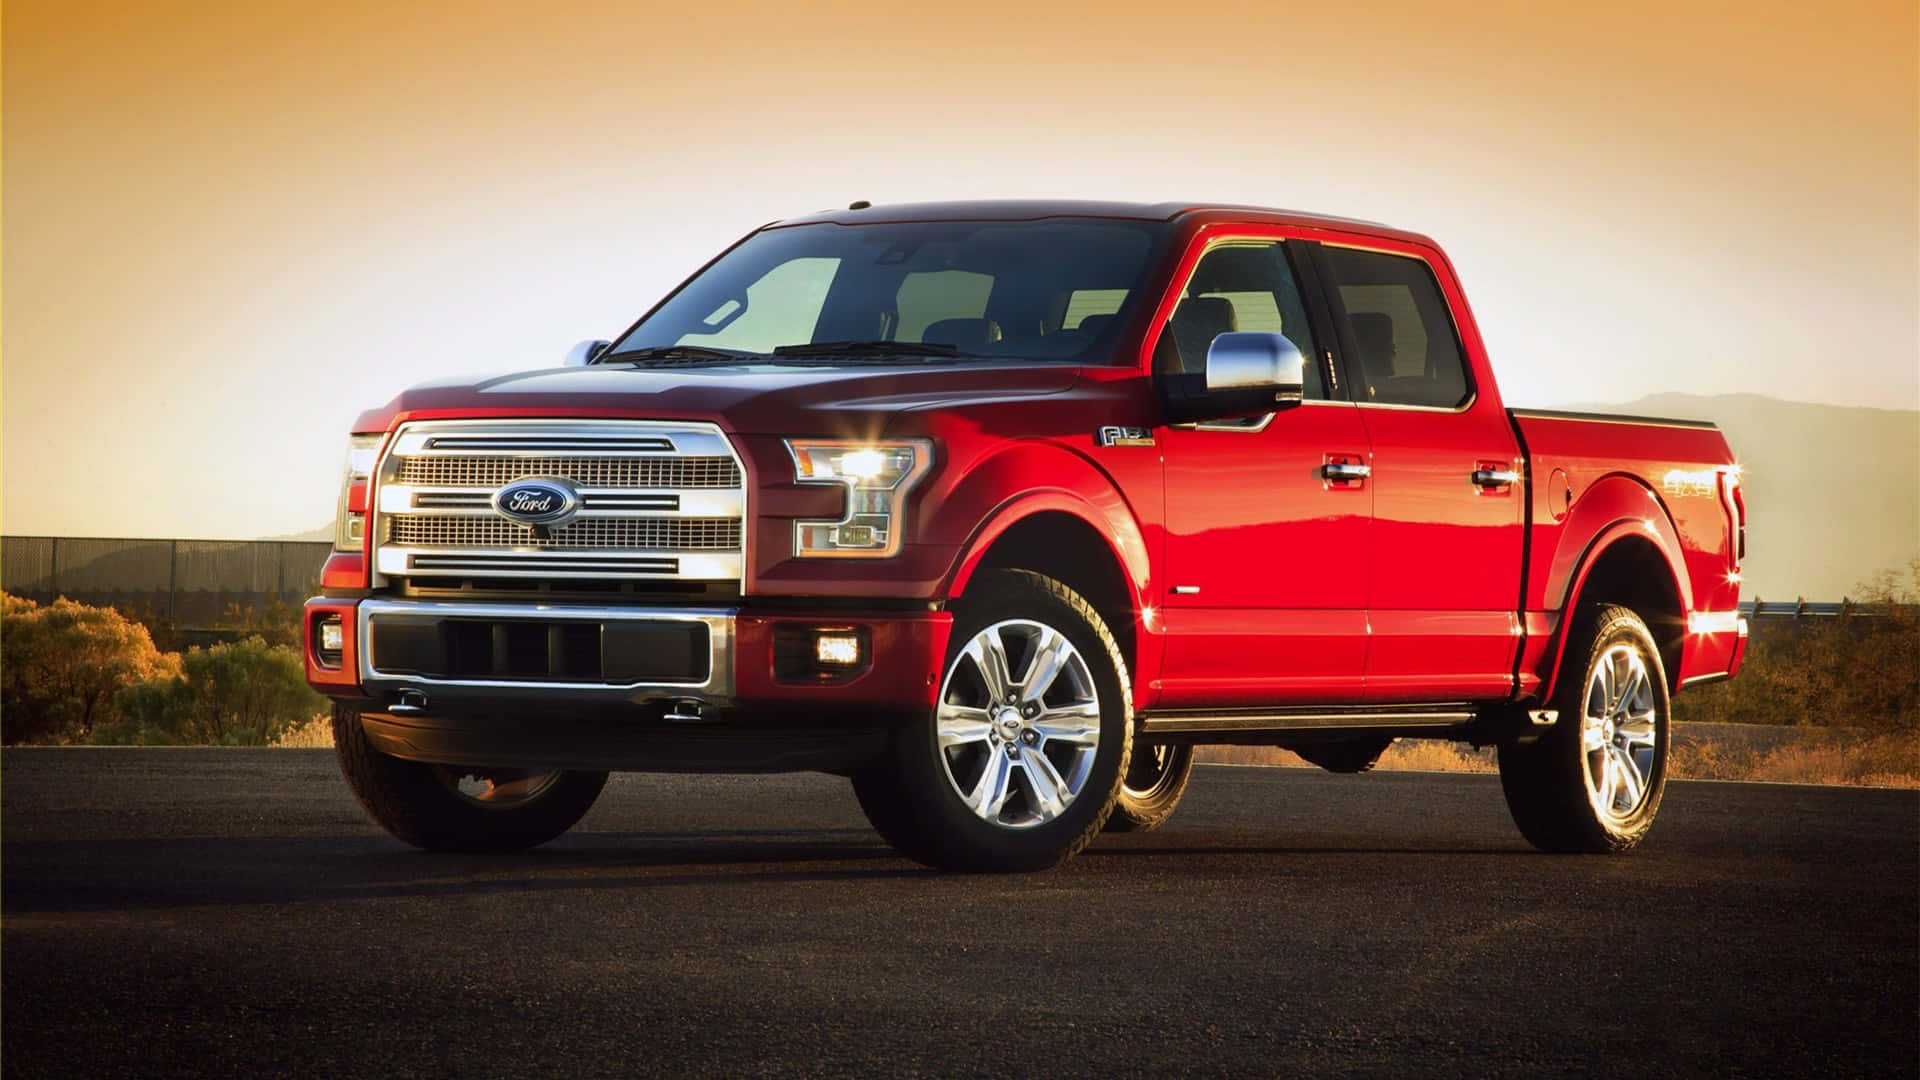 The Red Ford F - 150 Is Parked On A Desert Road Wallpaper